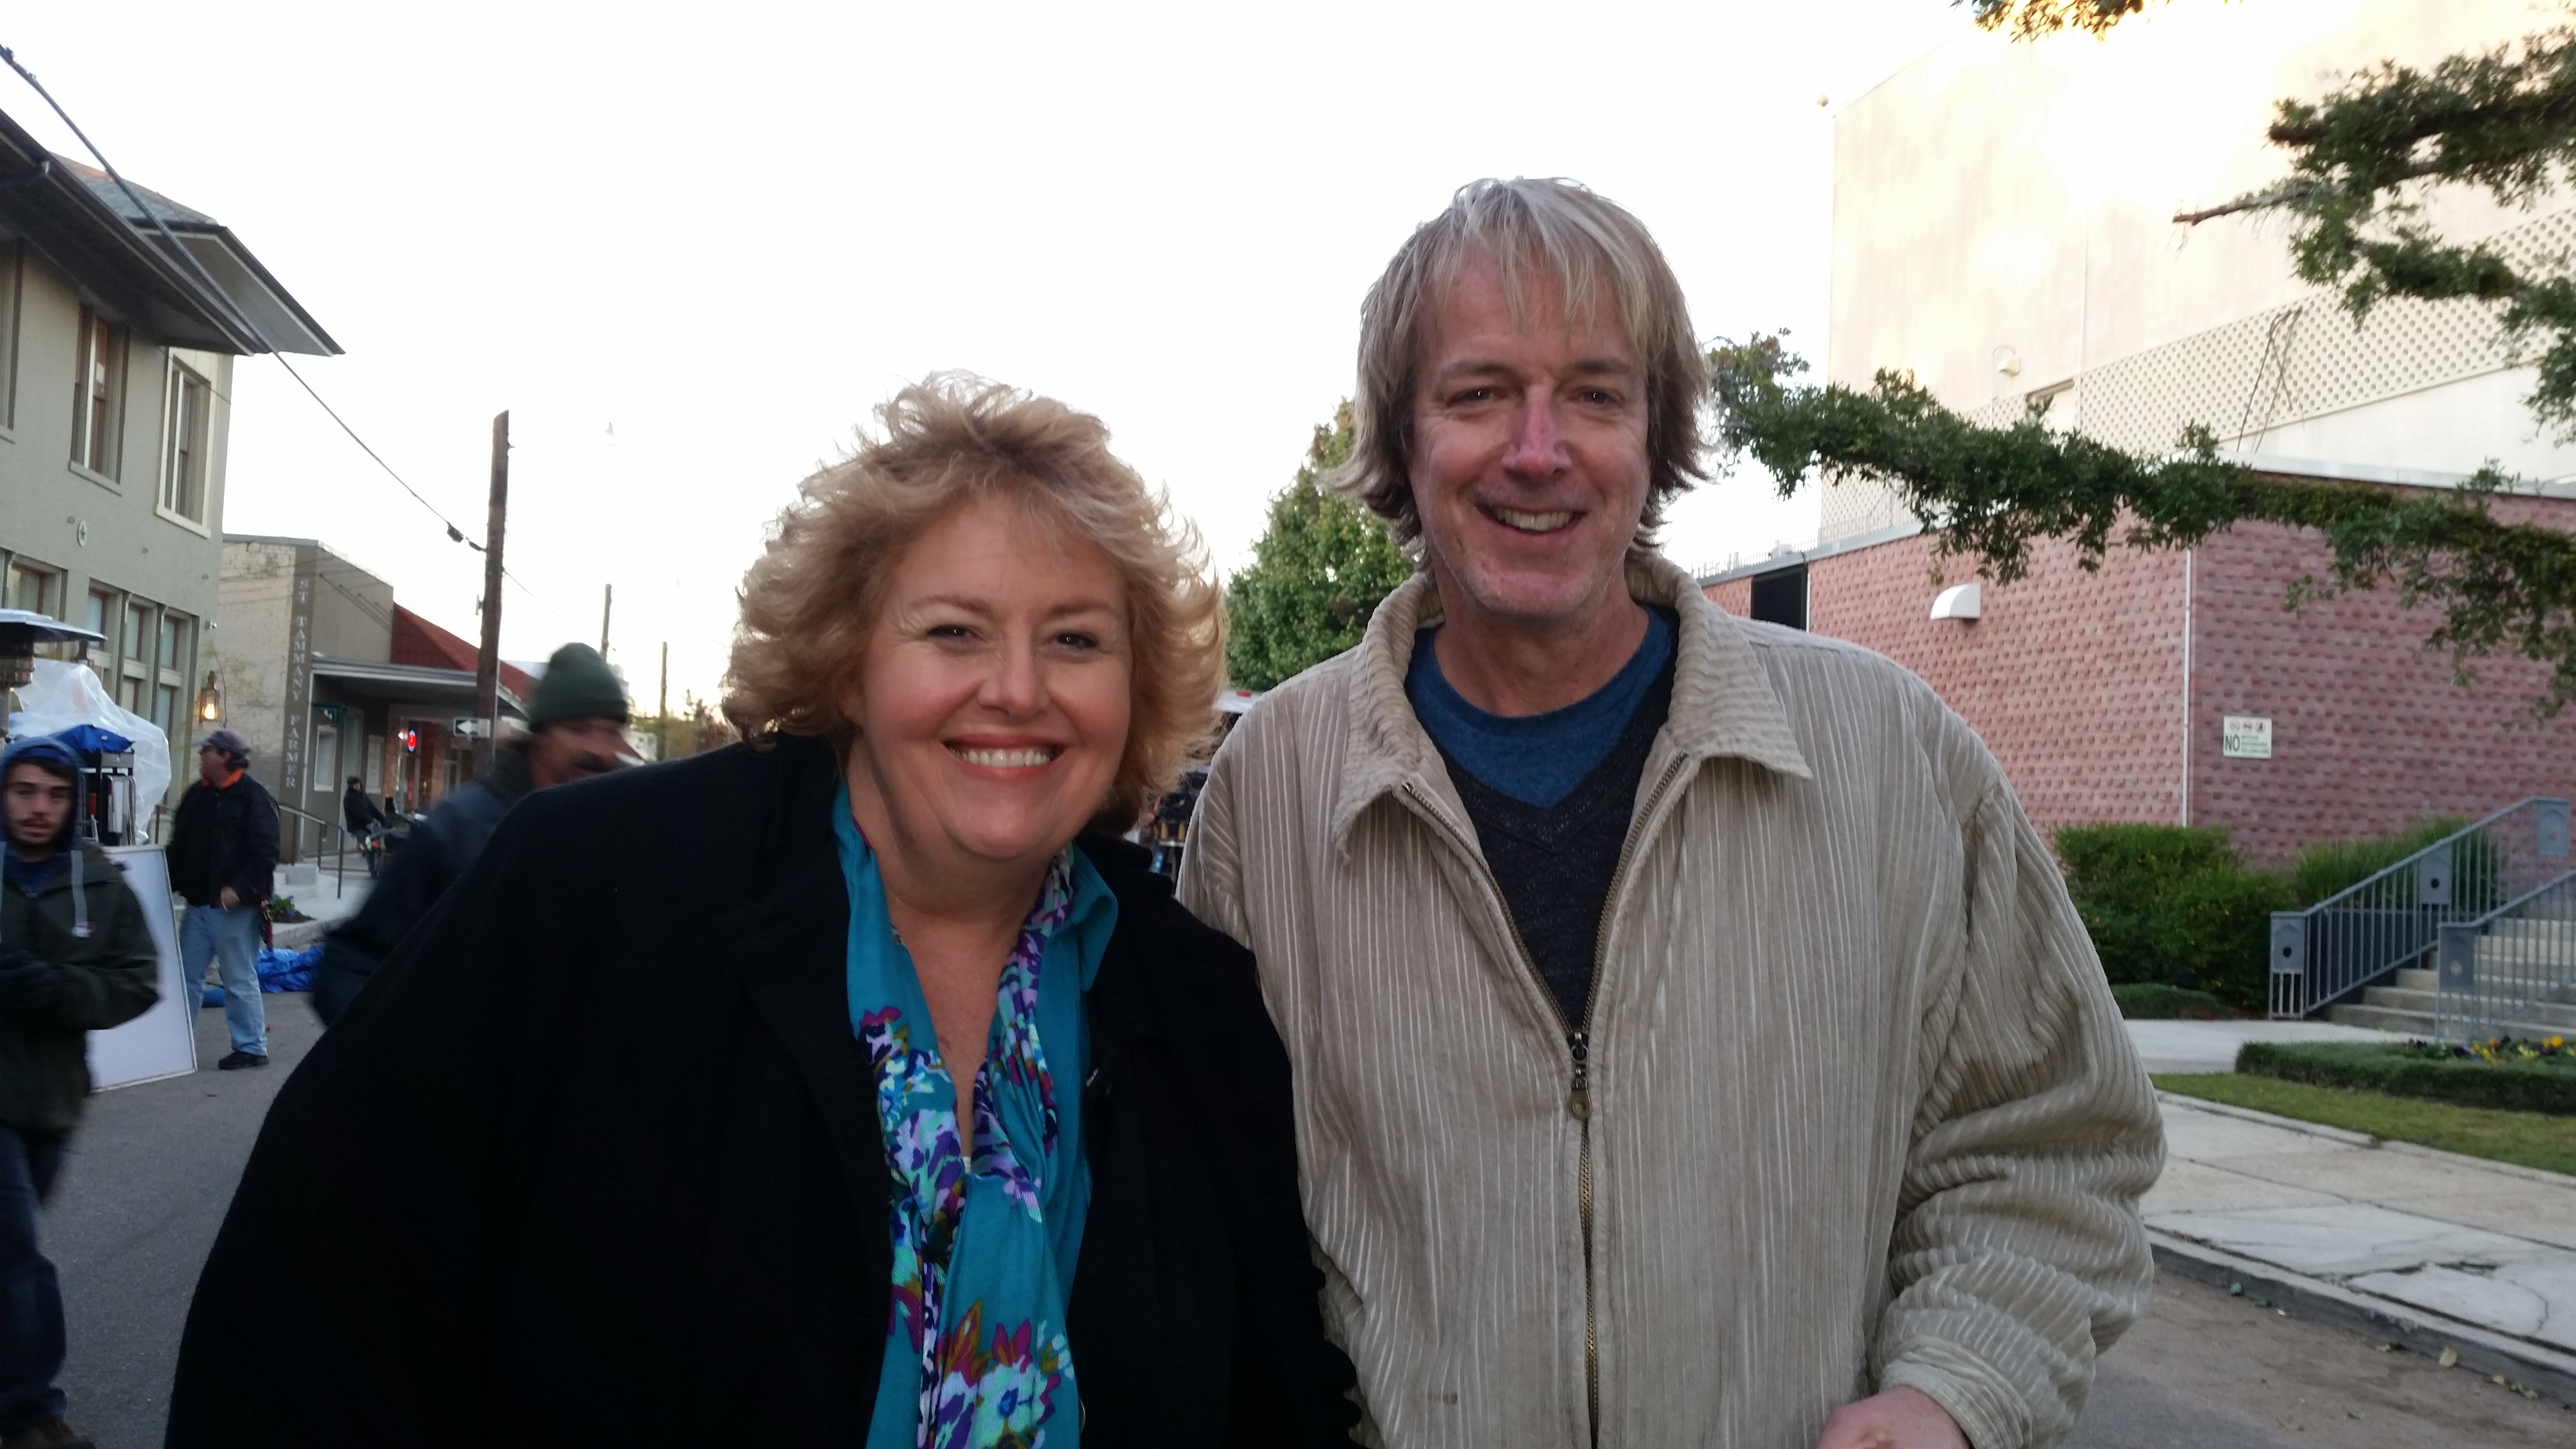 Tracy Weisert with director Fred Wolf on the set of JOE DIRT 2 in New Orleans, November 17, 2014. He is delightful!